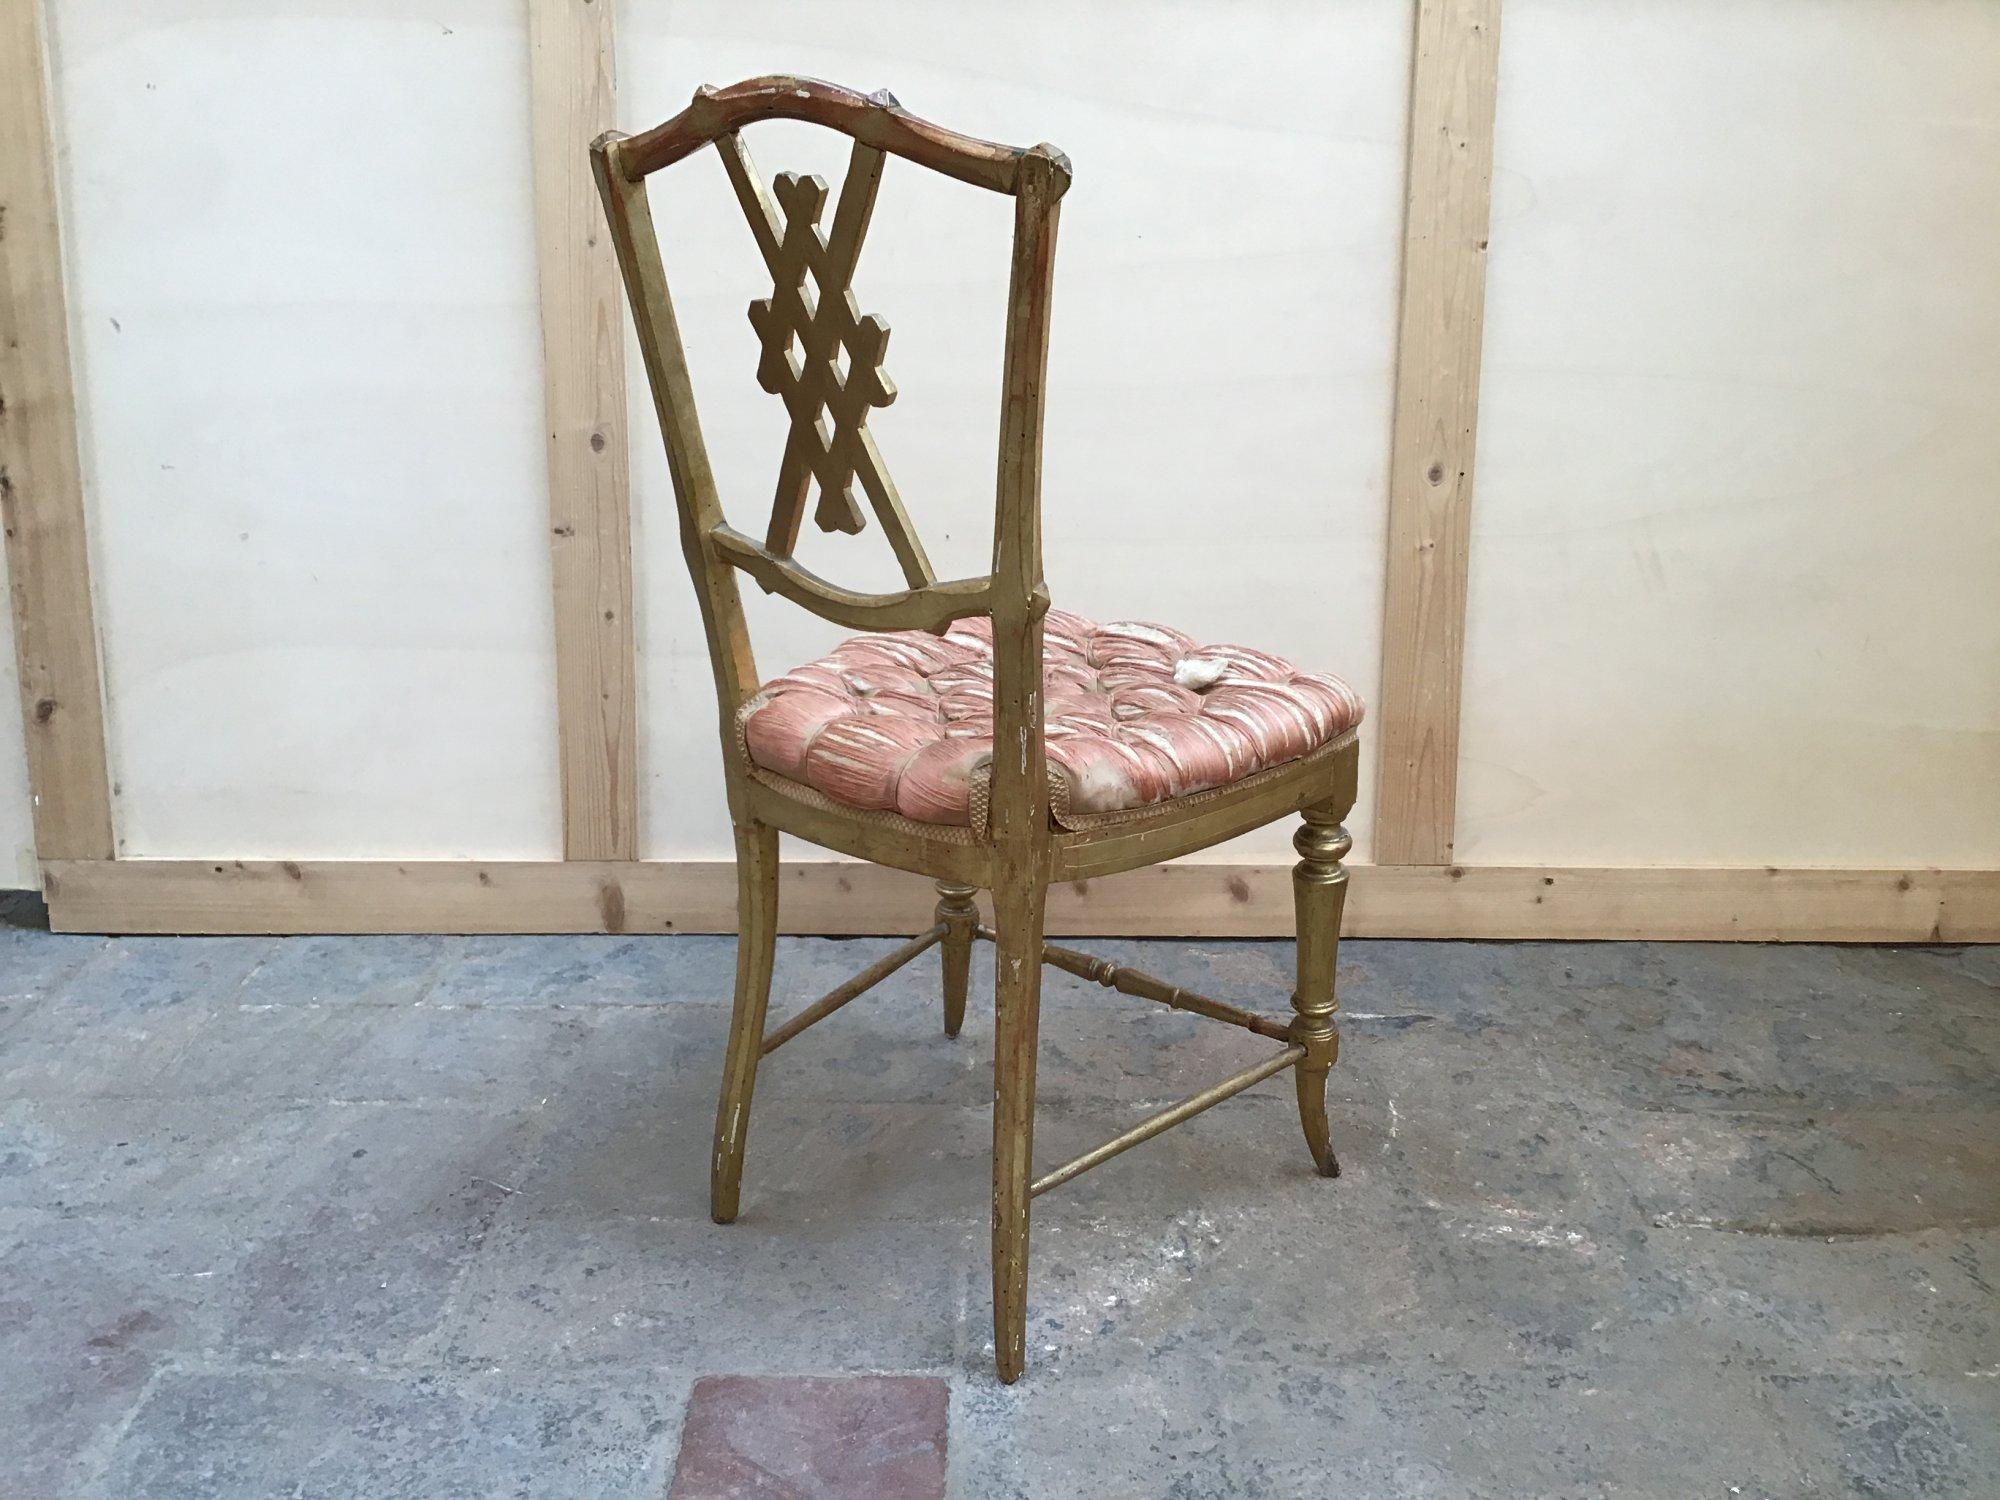 19th Century Italian Pair of Gilt Wooden Chairs with Original Upholstery, 1890s For Sale 1